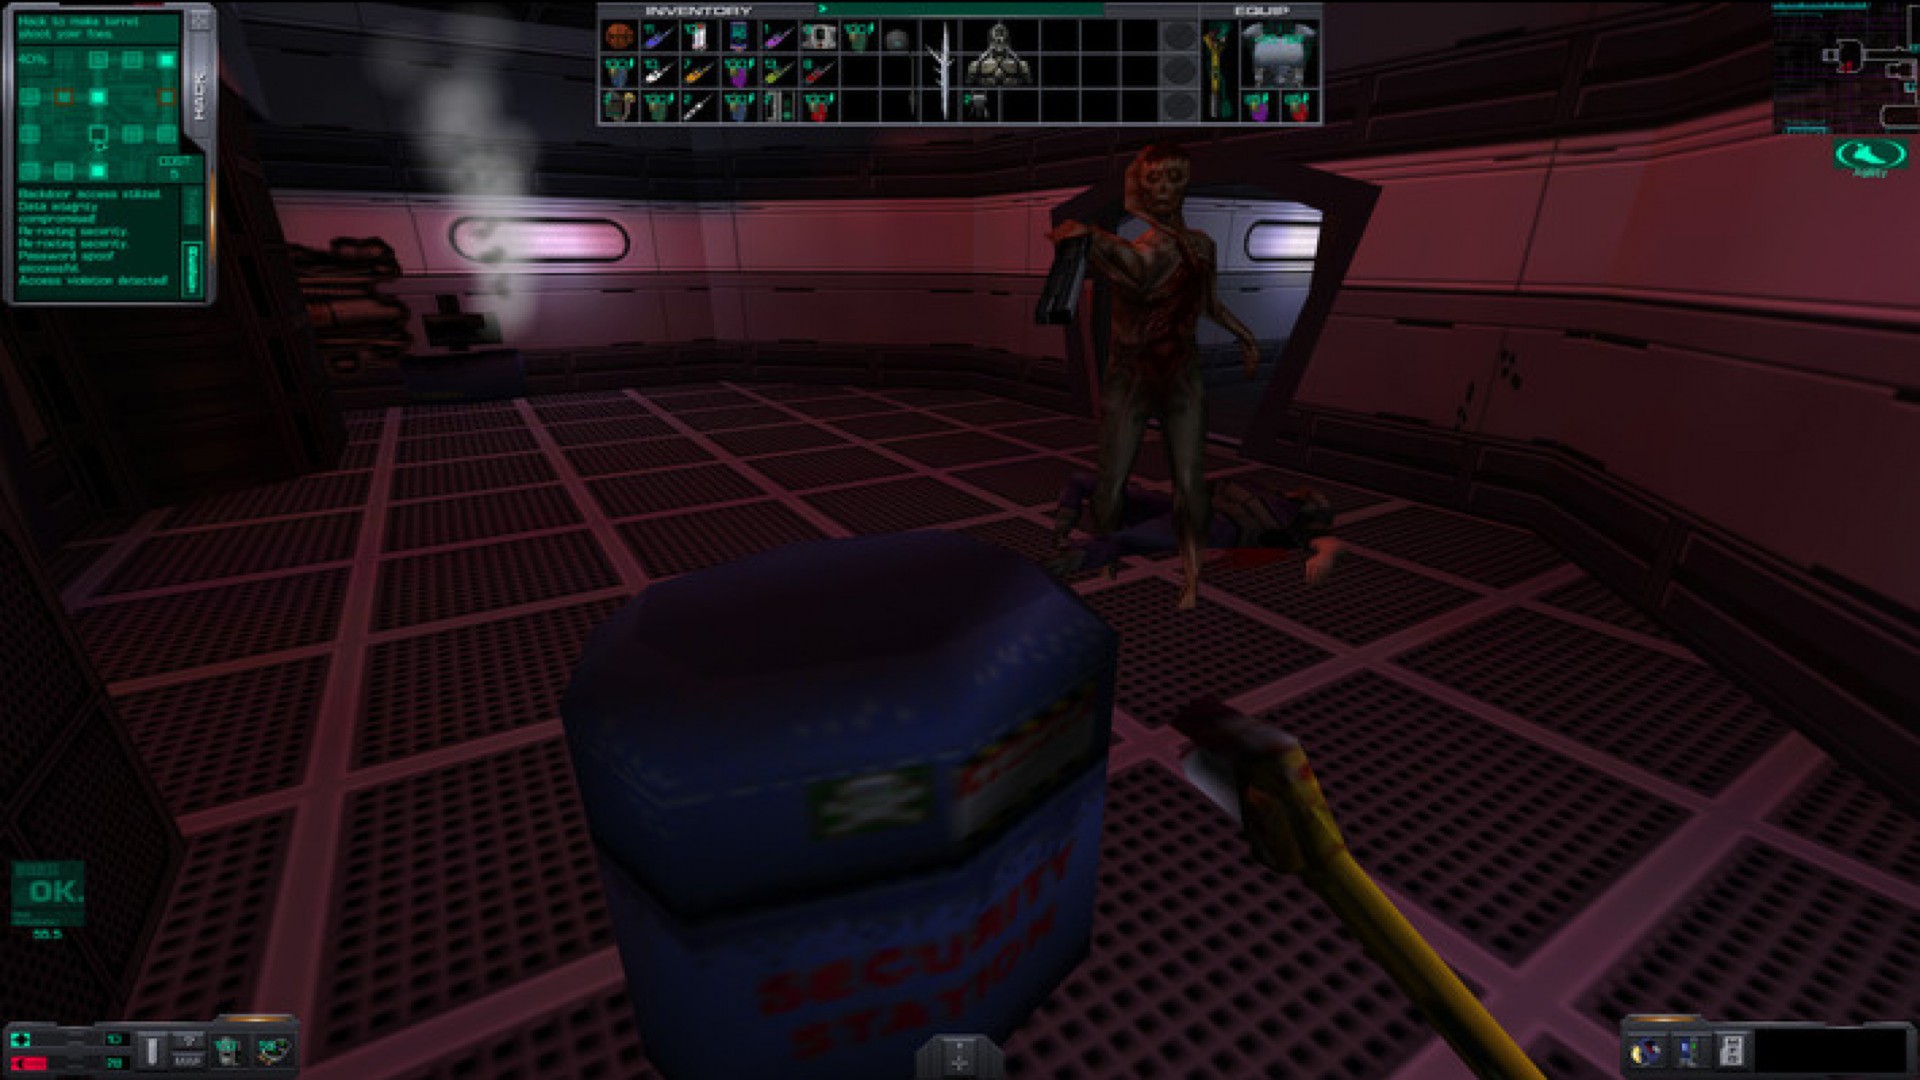 steam system shock enhanced edition has stopped working